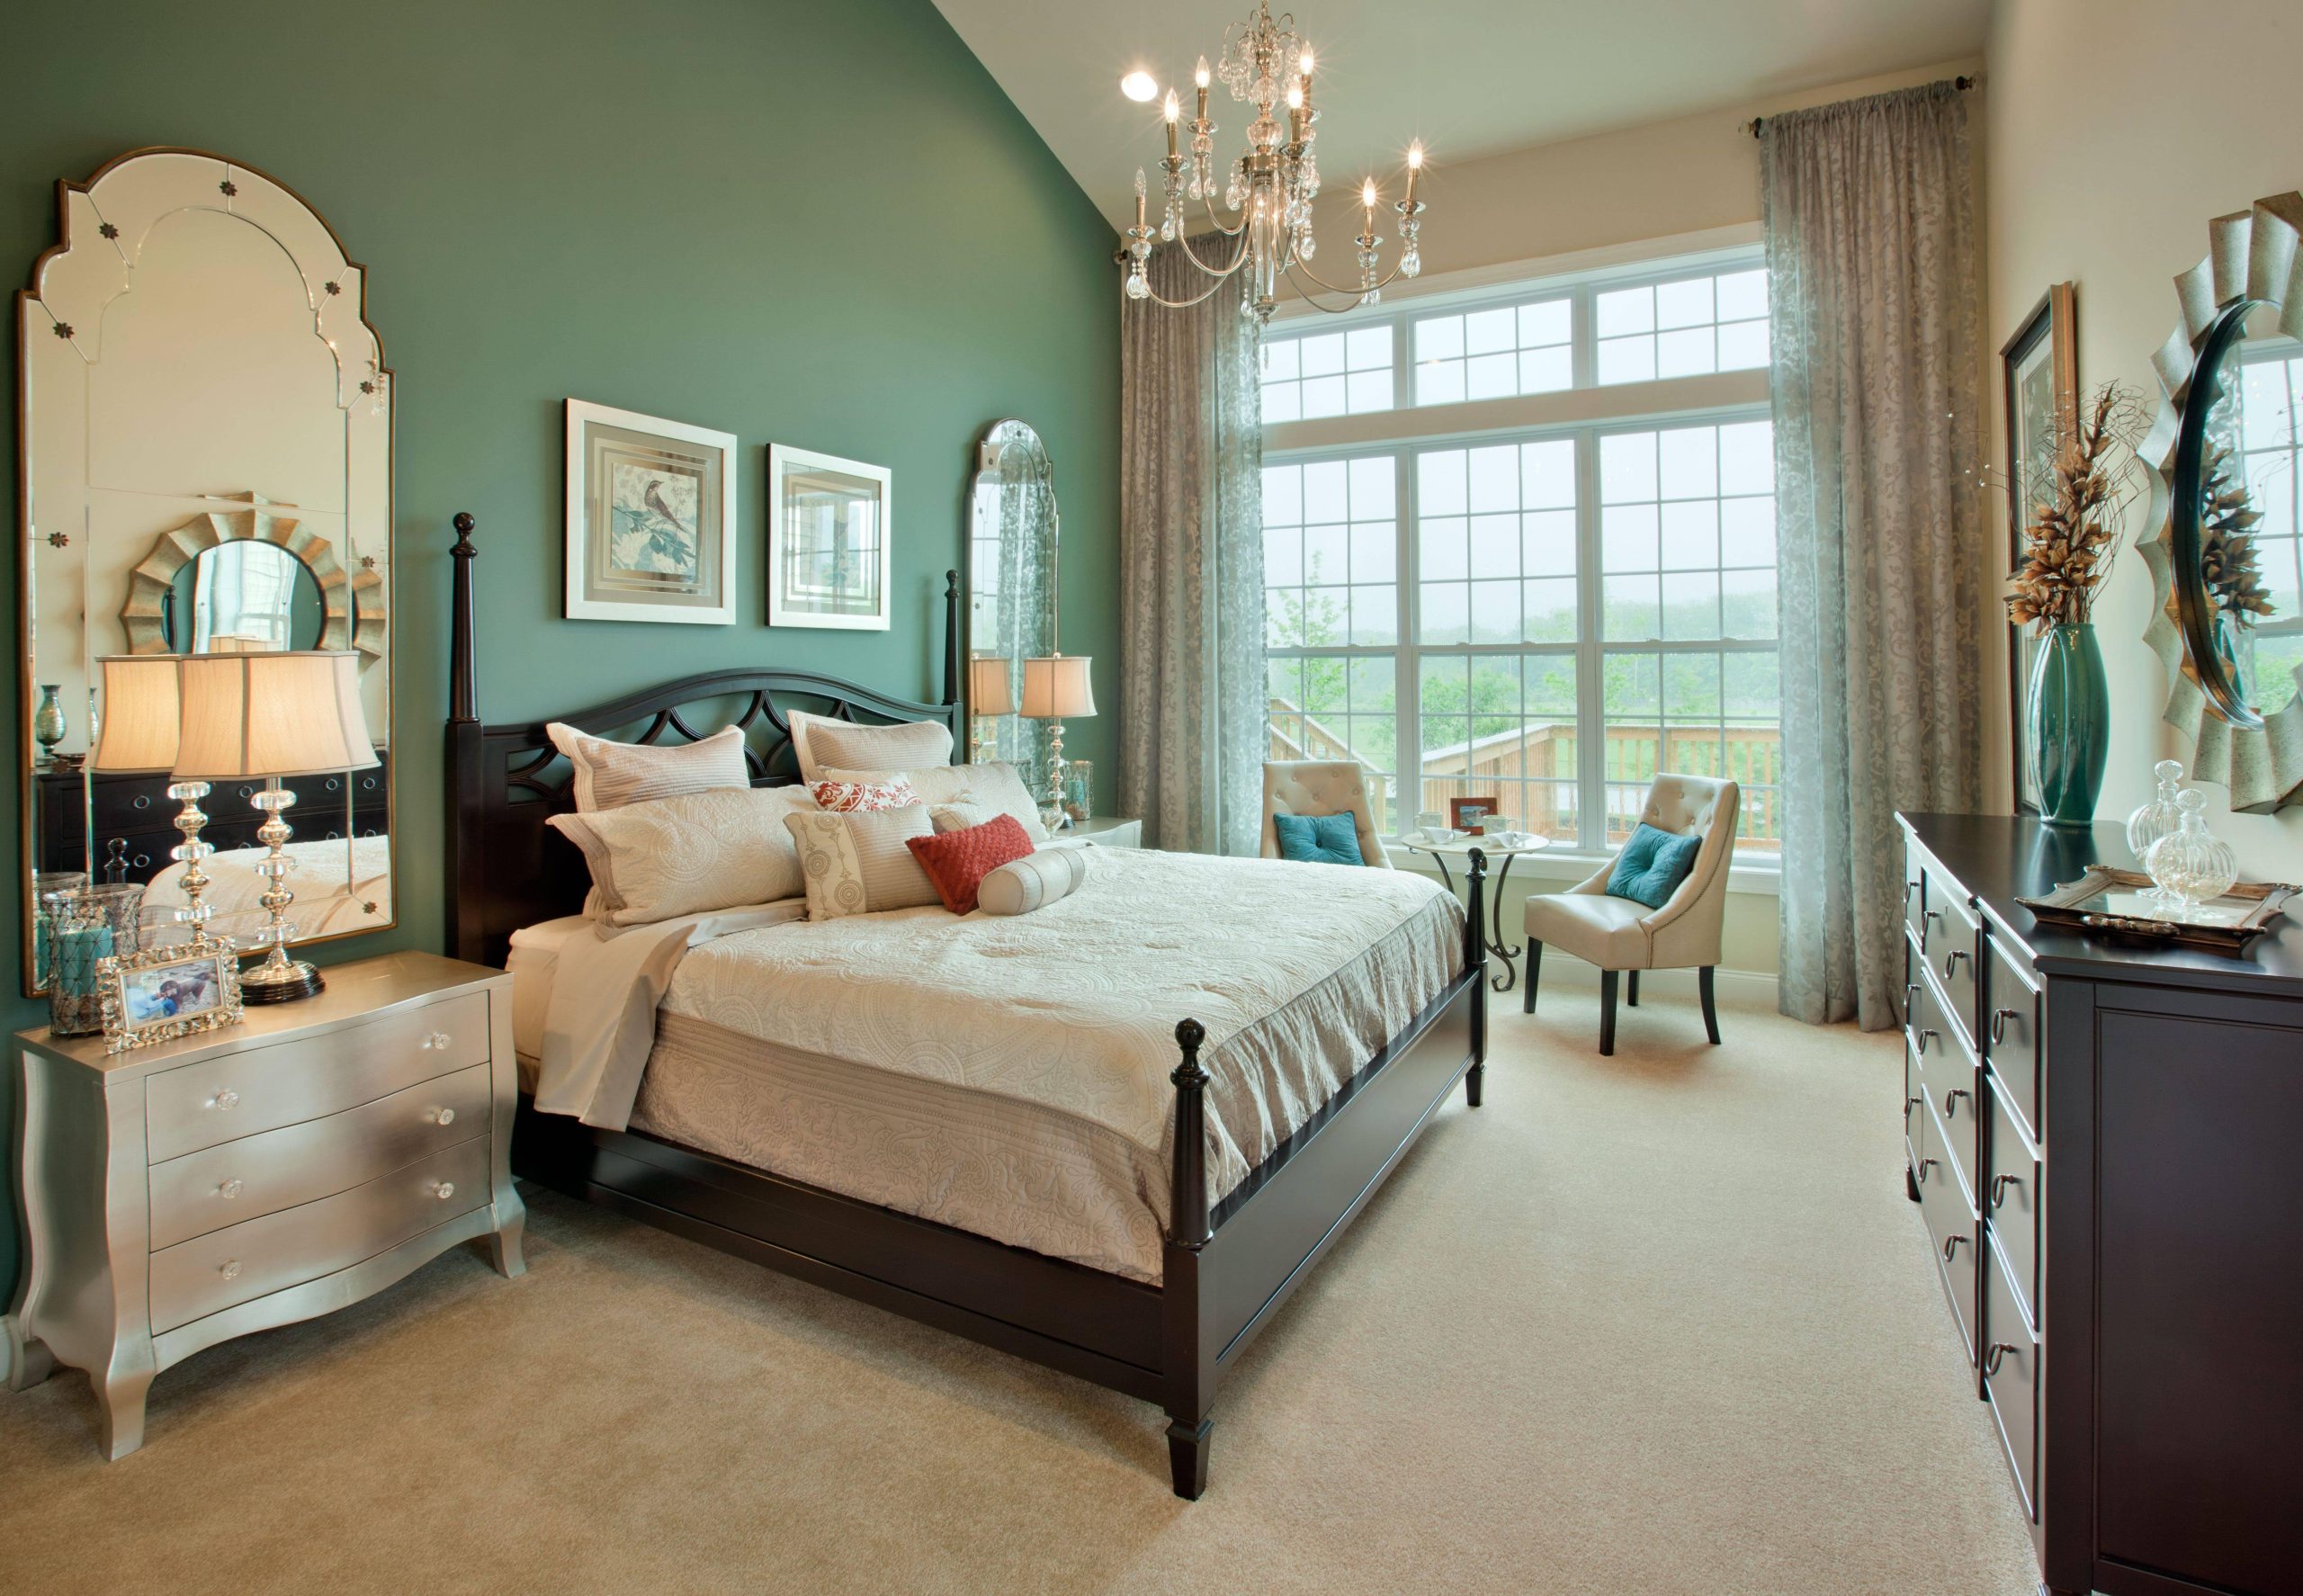 Bedroom Paint Colors And Design